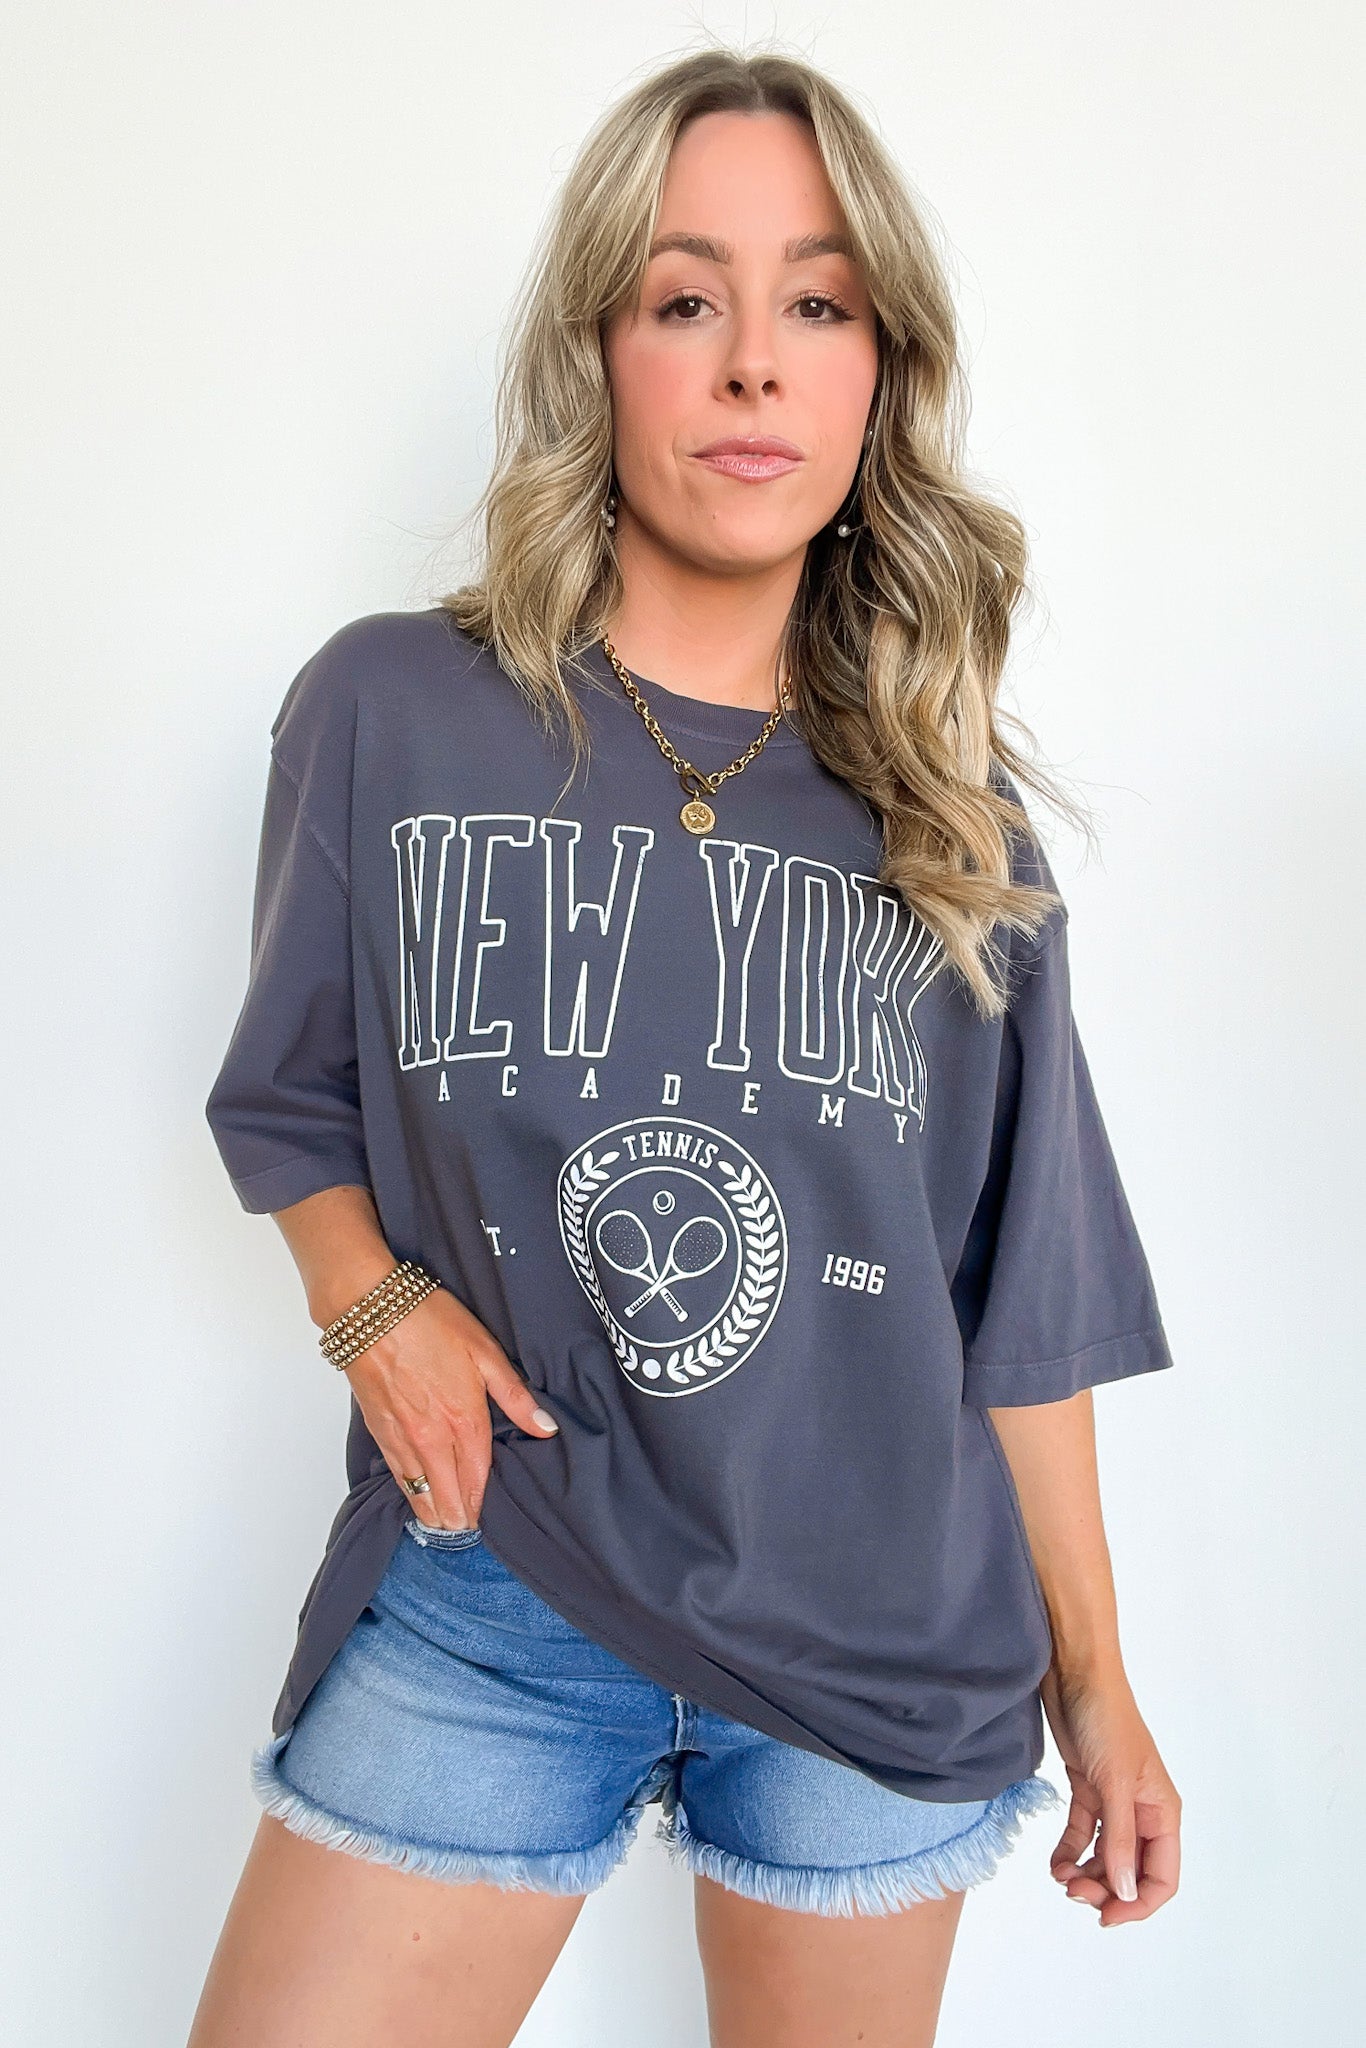  New York Academy Vintage Graphic Tee - Madison and Mallory